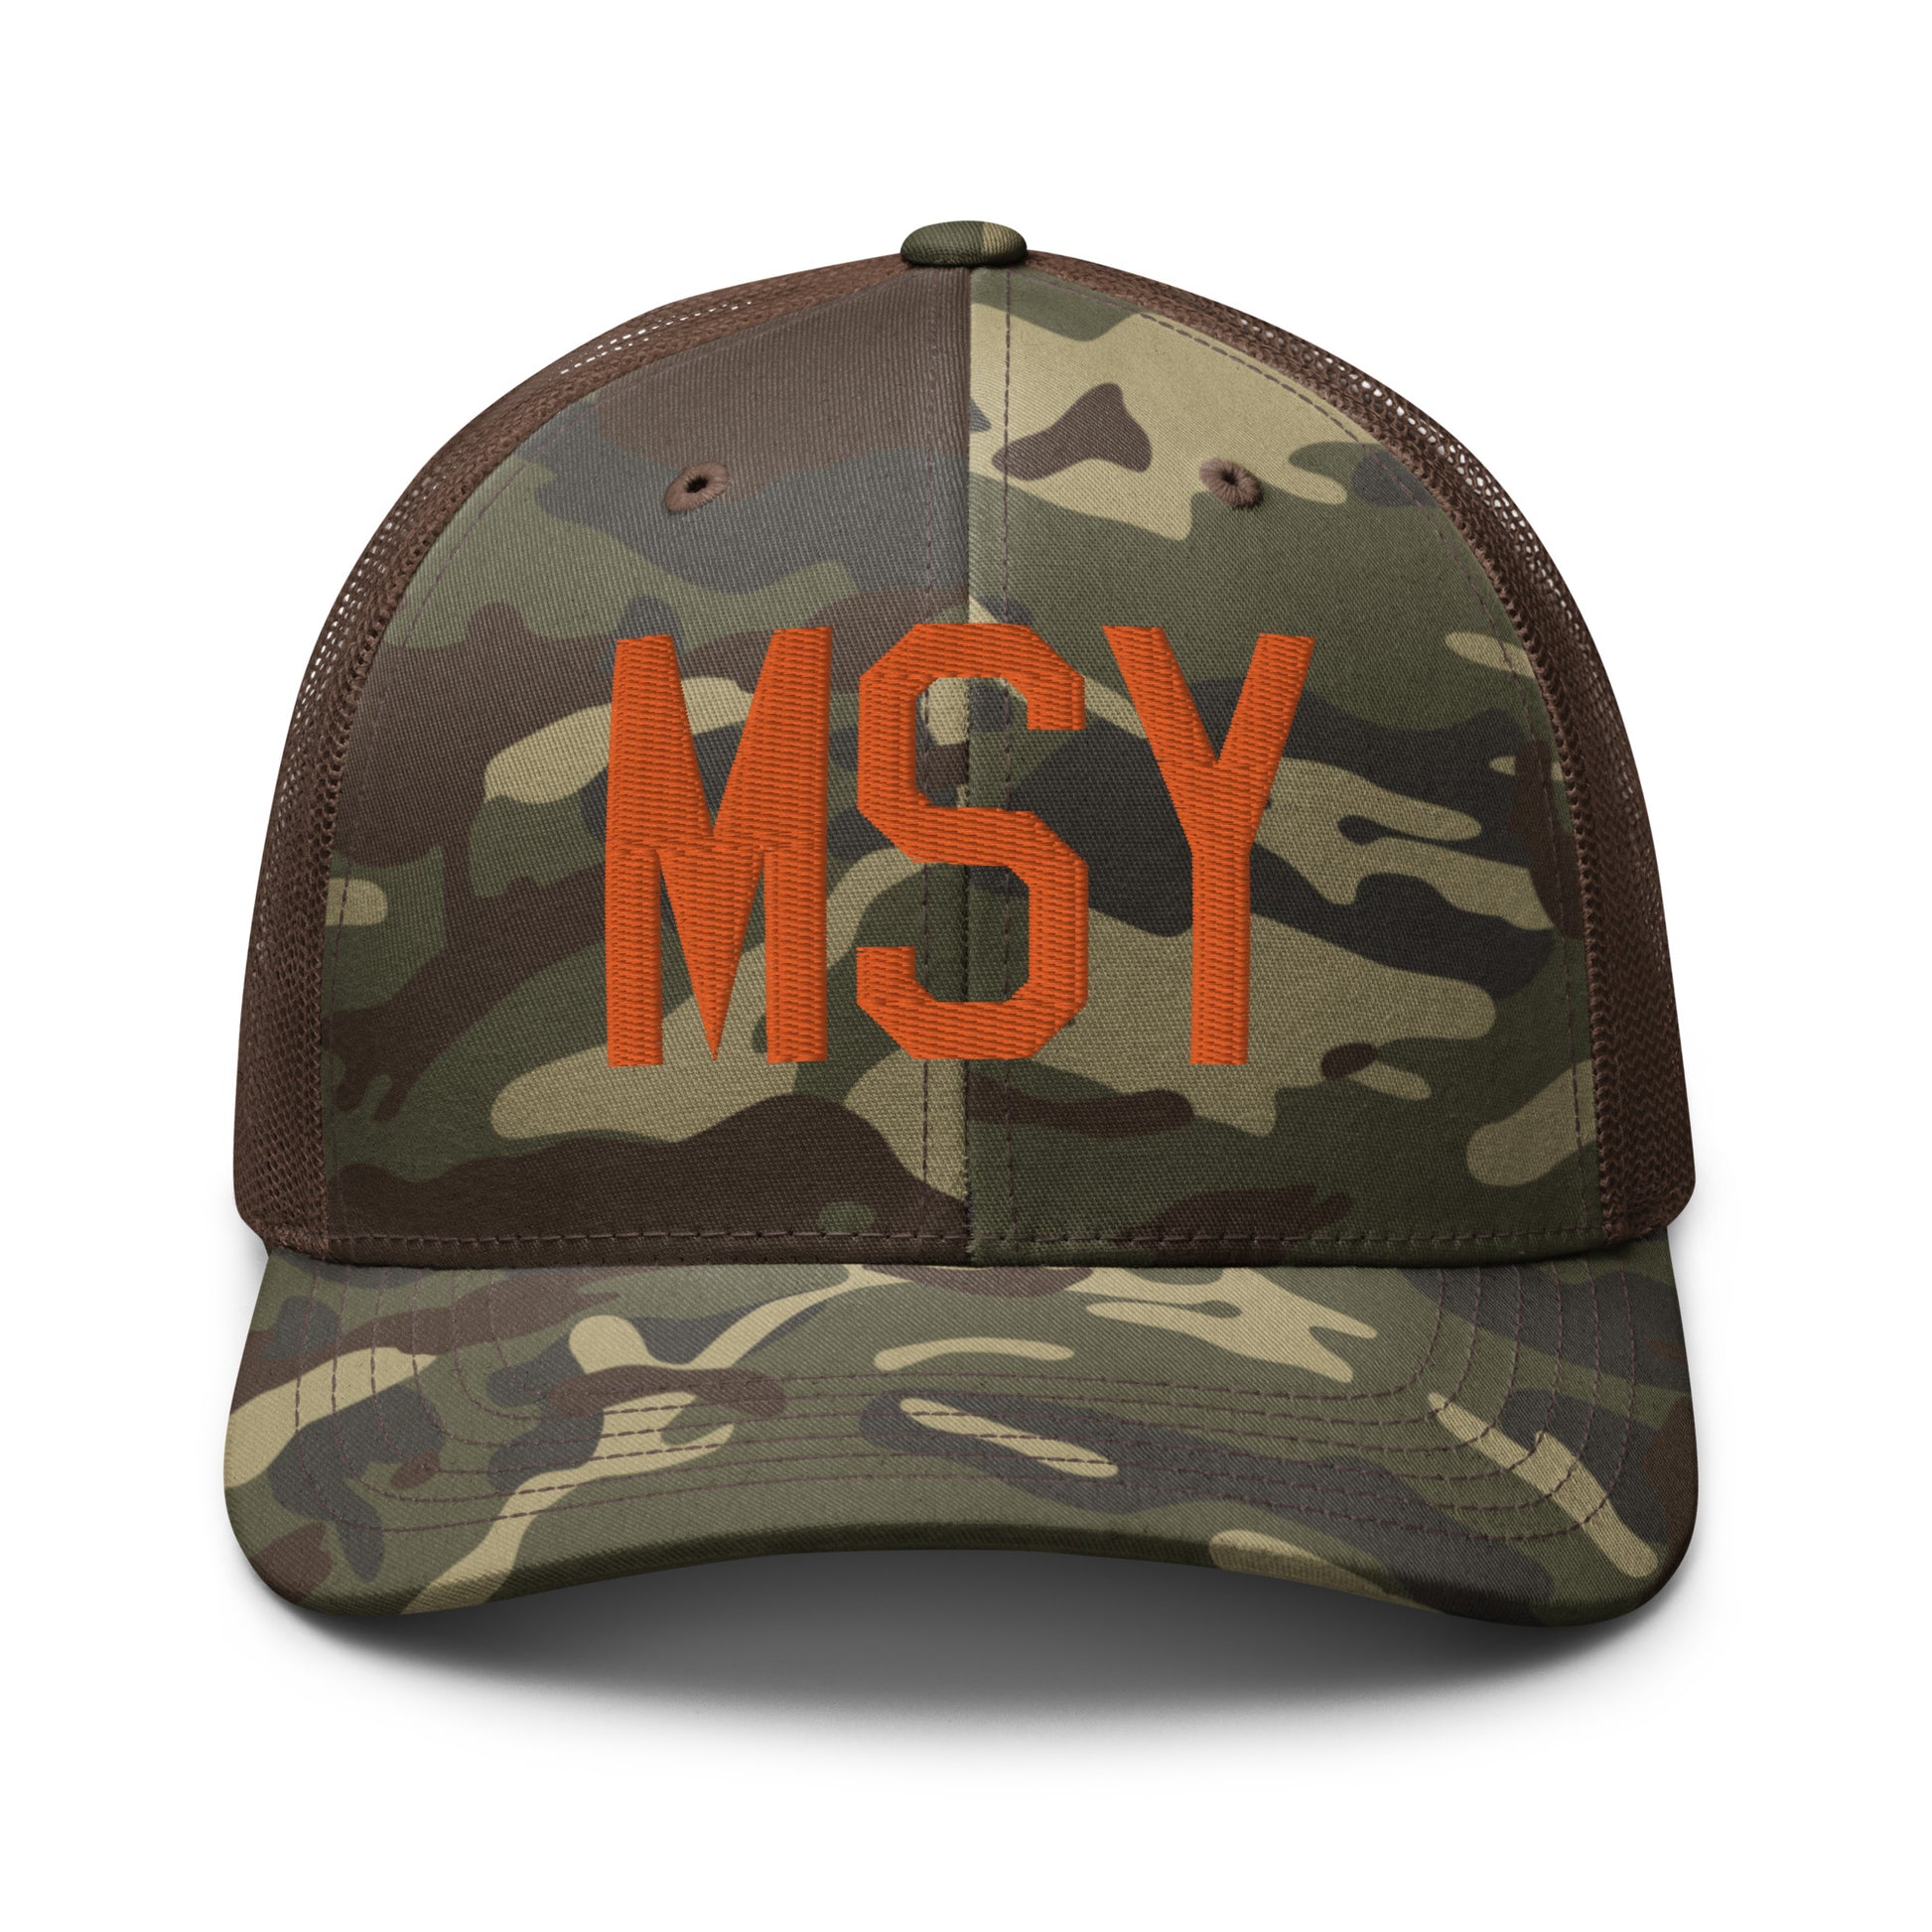 Airport Code Camouflage Trucker Hat - Orange • MSY New Orleans • YHM Designs - Image 13